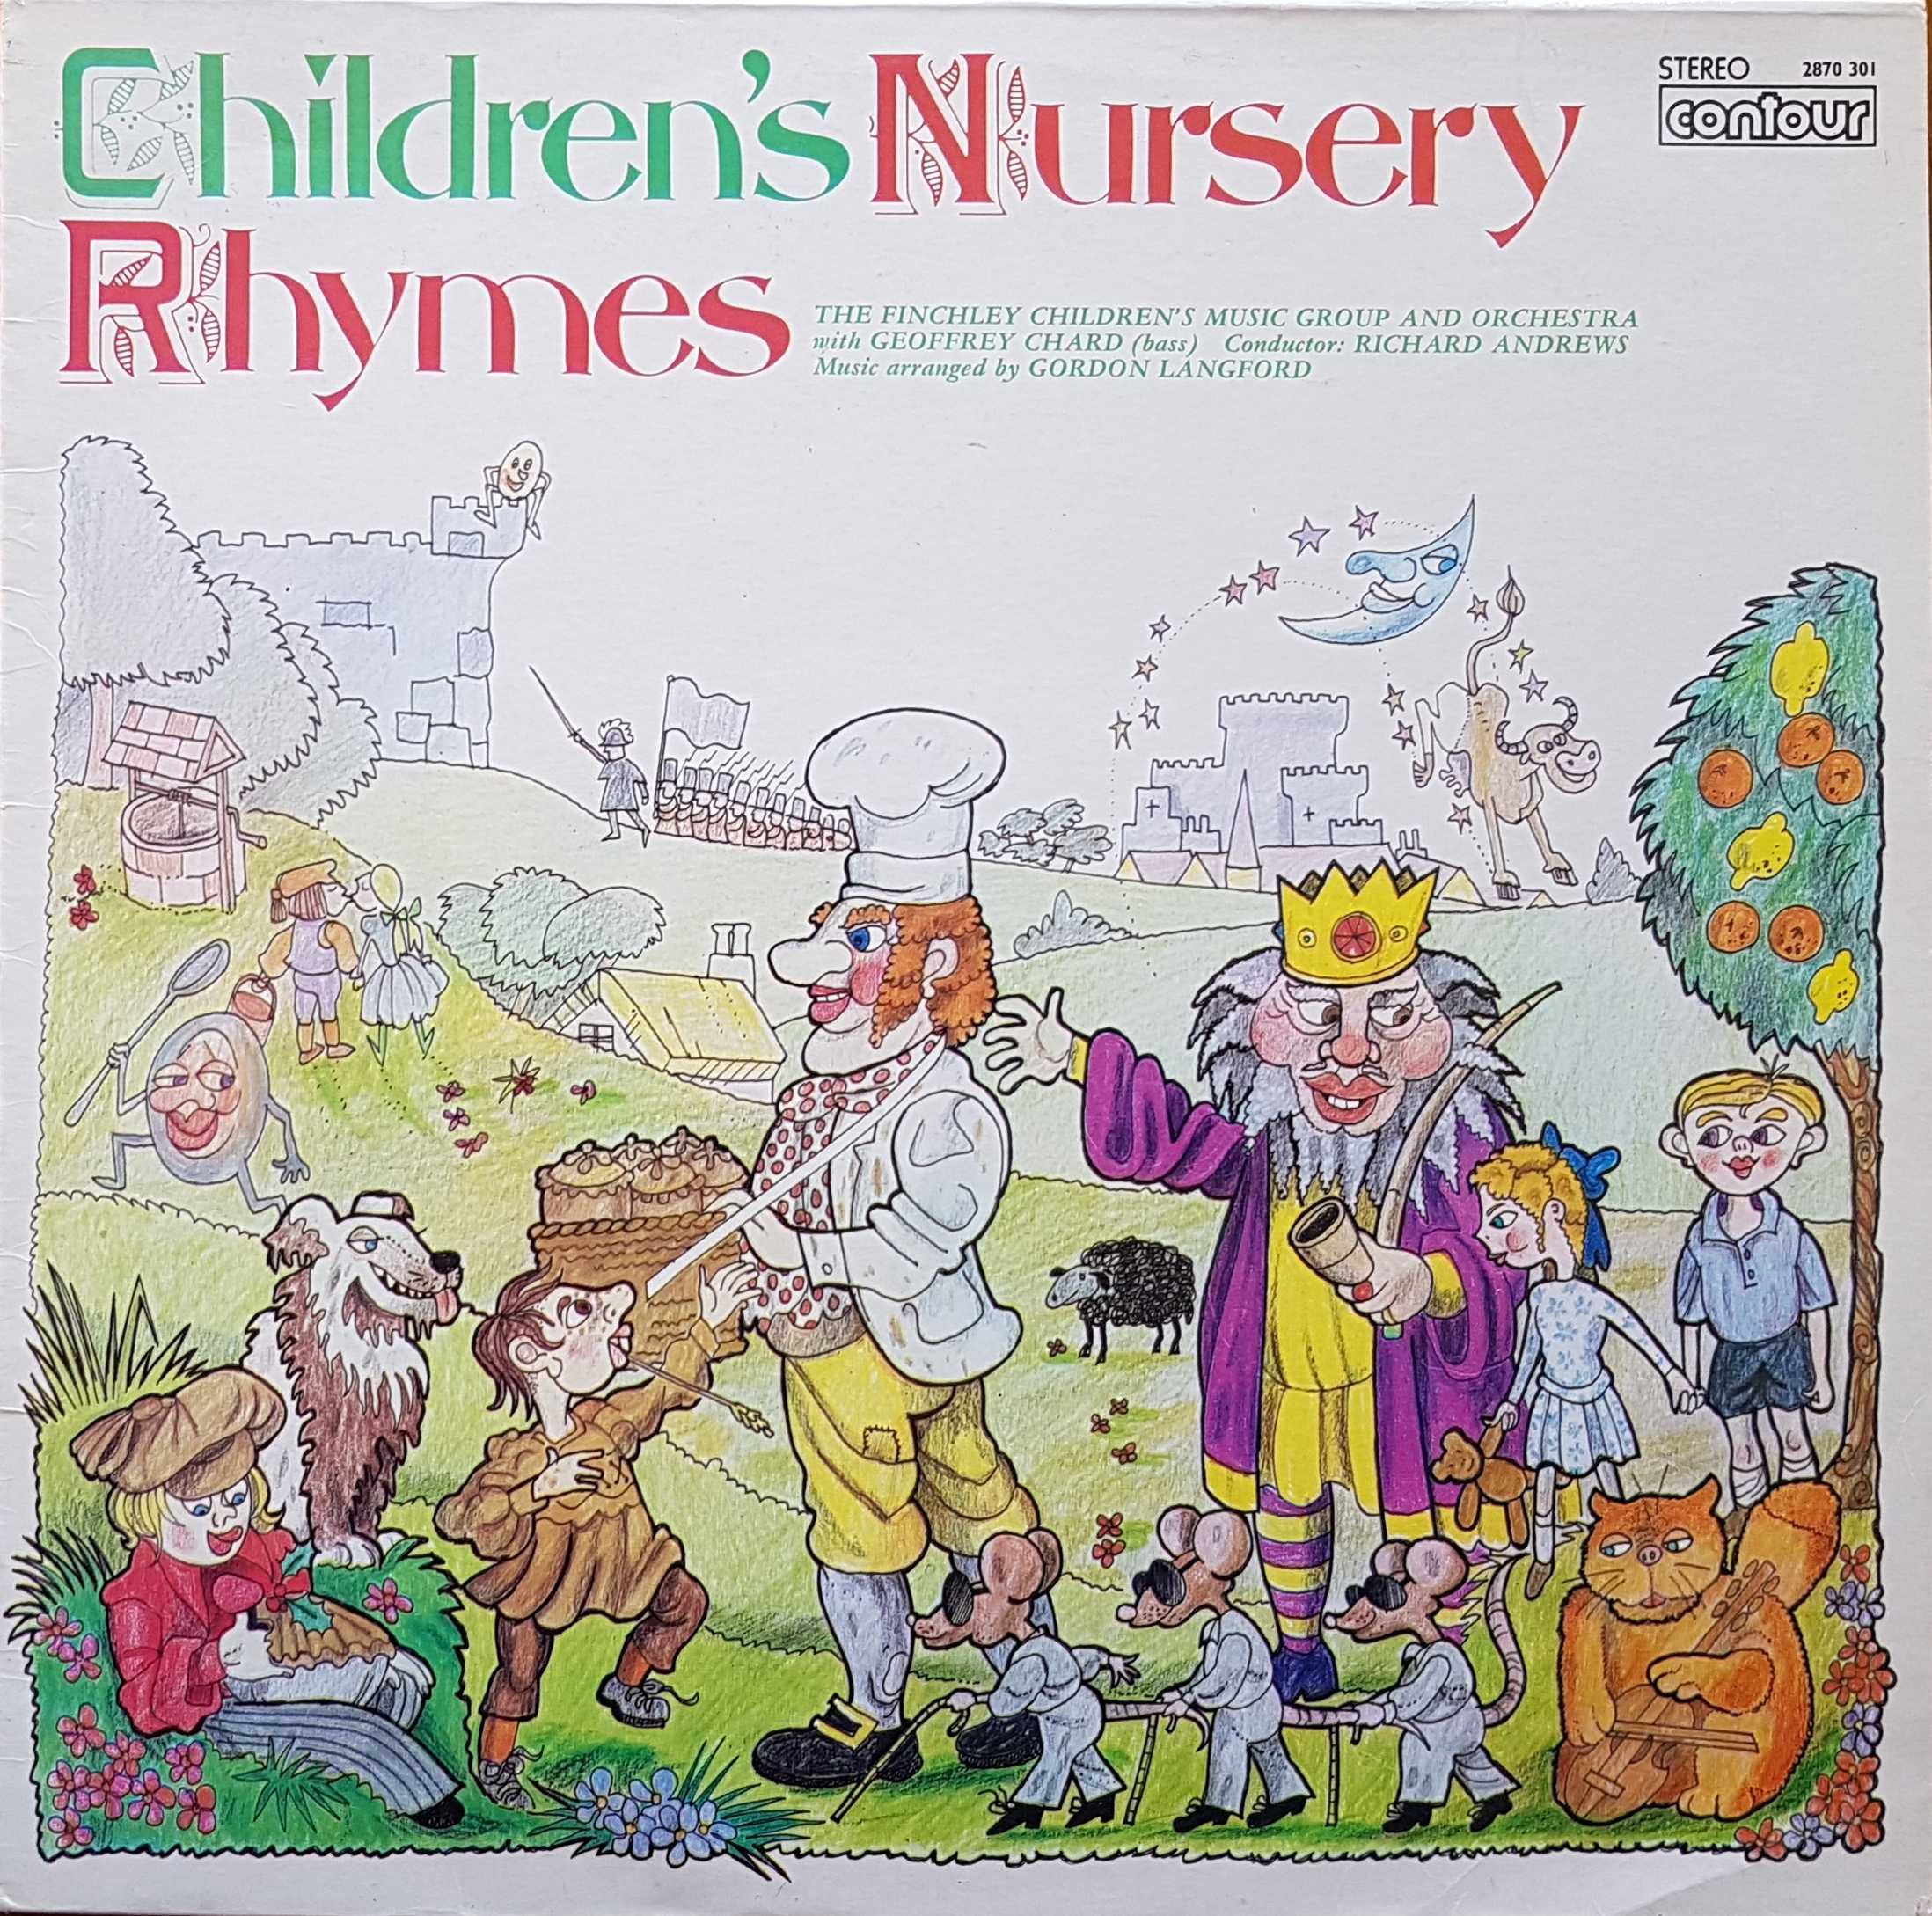 Picture of C 2870301 Children's nursery rhymes by artist Various from ITV, Channel 4 and Channel 5 albums library